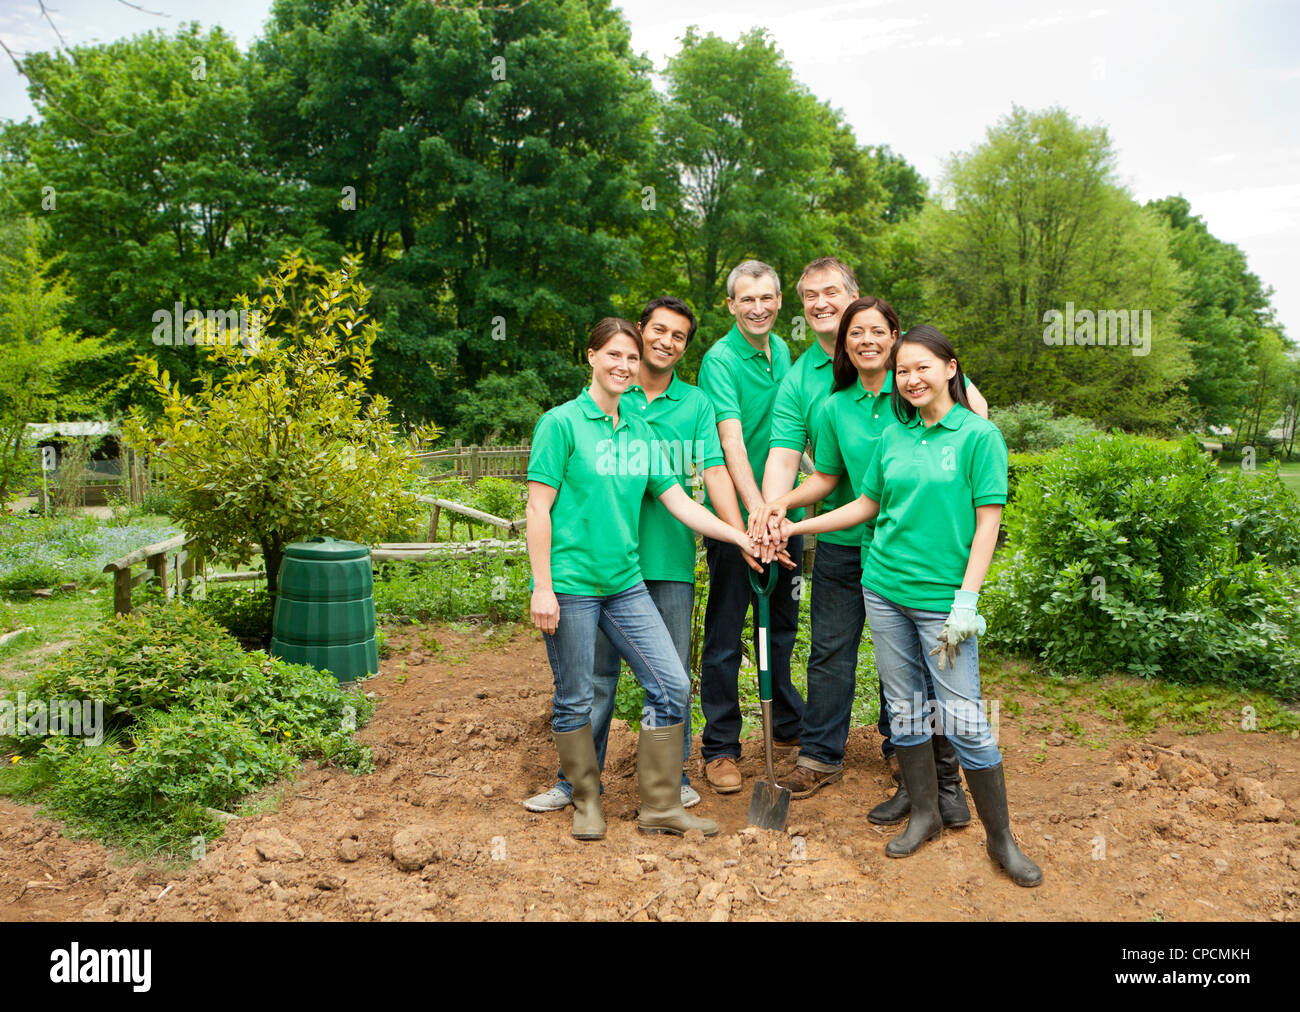 Jardiniers posing together in park Banque D'Images